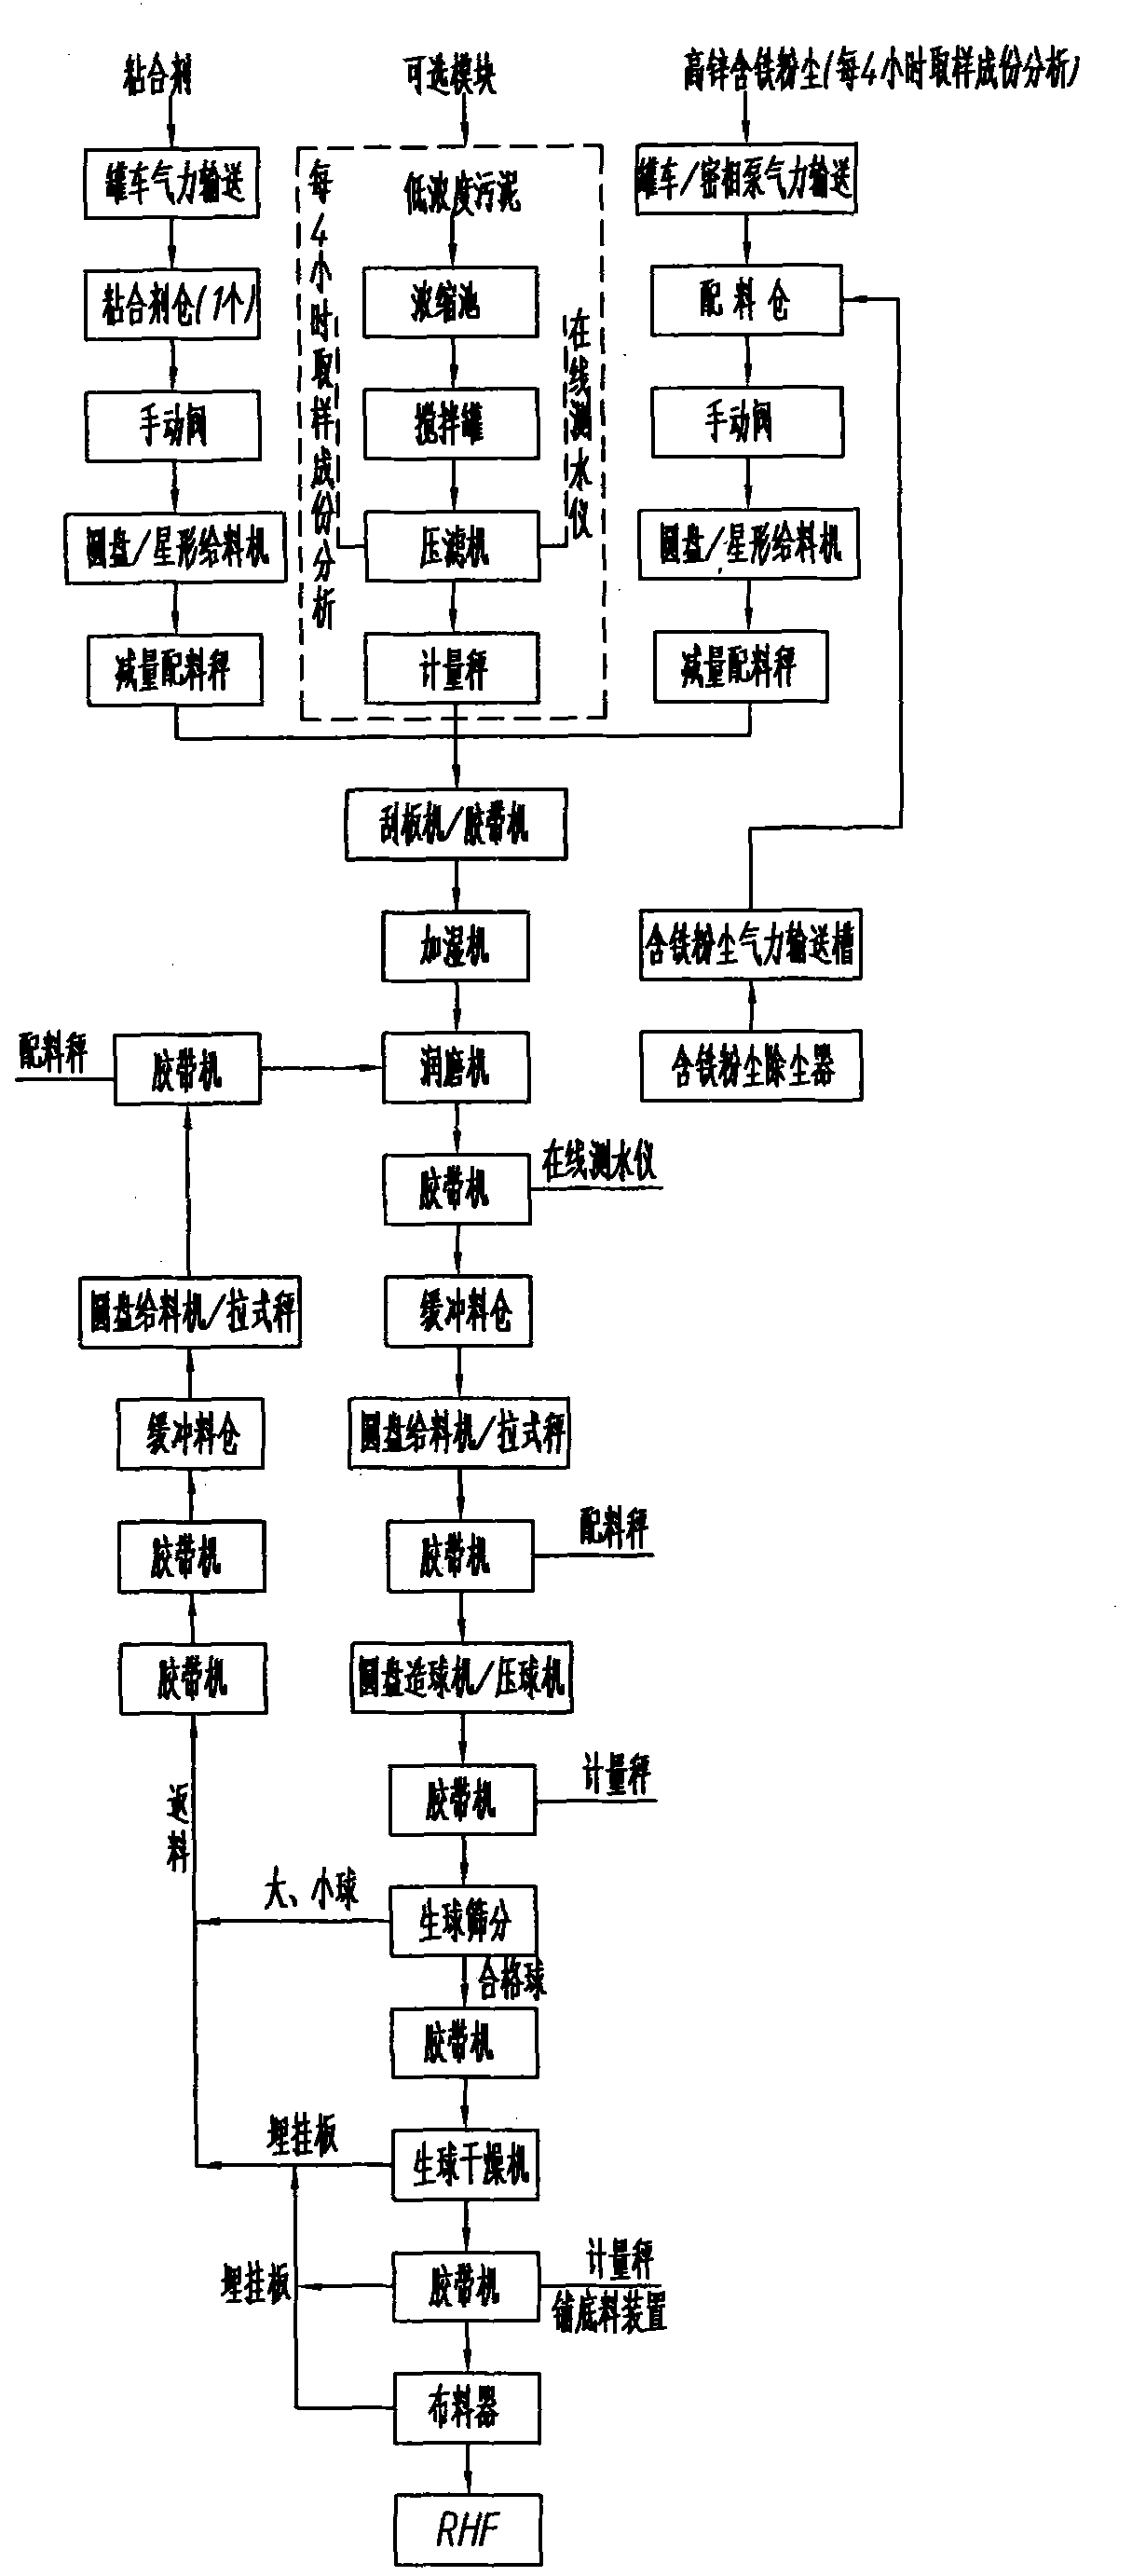 Raw material treatment and pelletizing system process for rotary hearth furnace